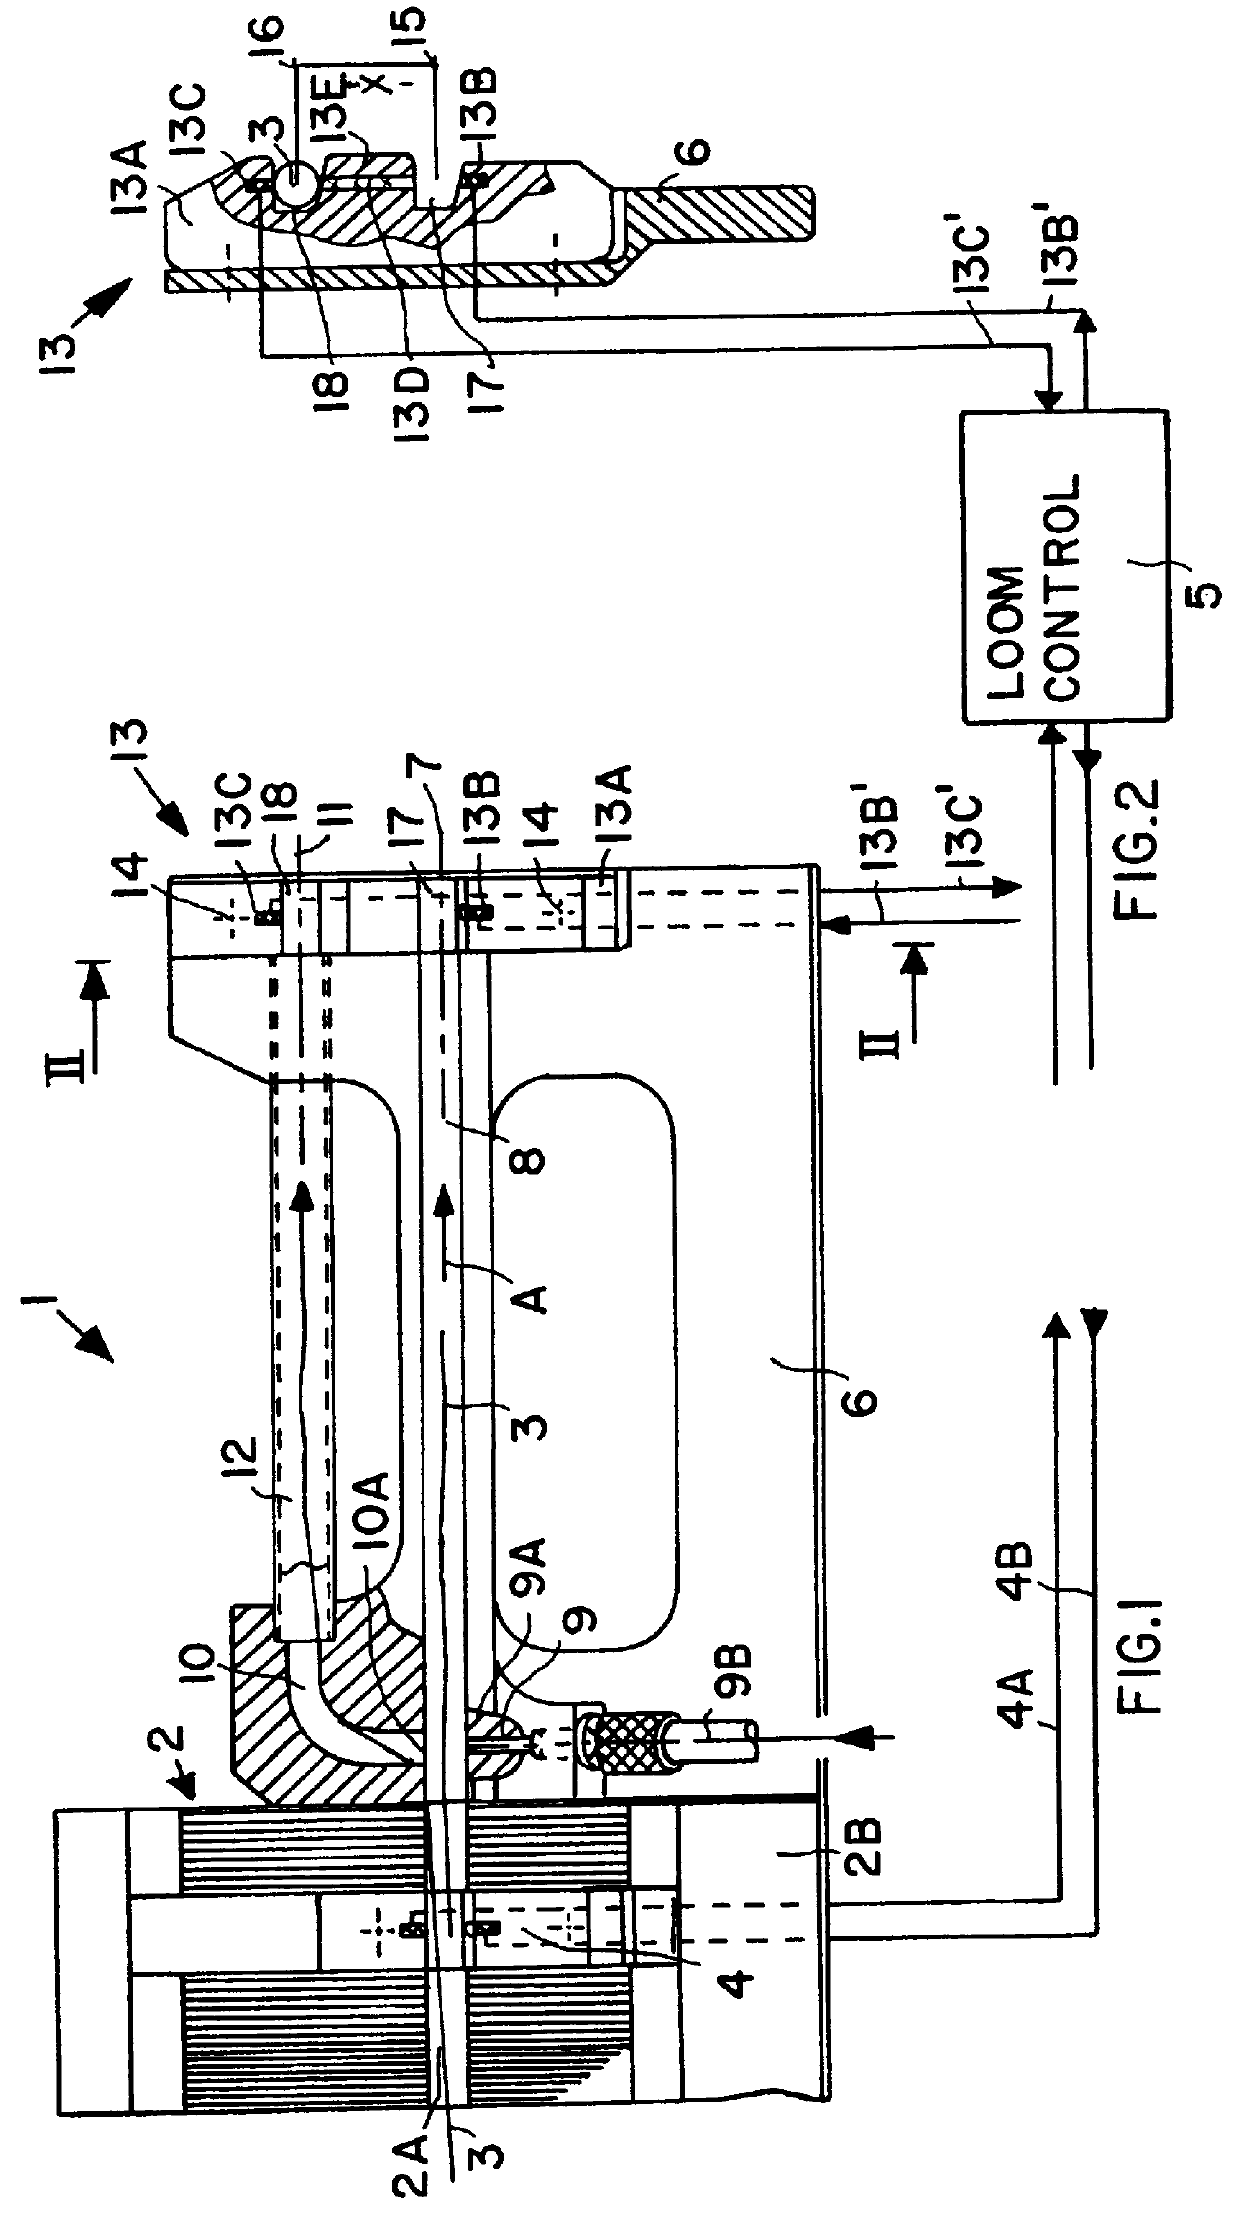 Weft stretching and detecting apparatus for a jet weaving loom